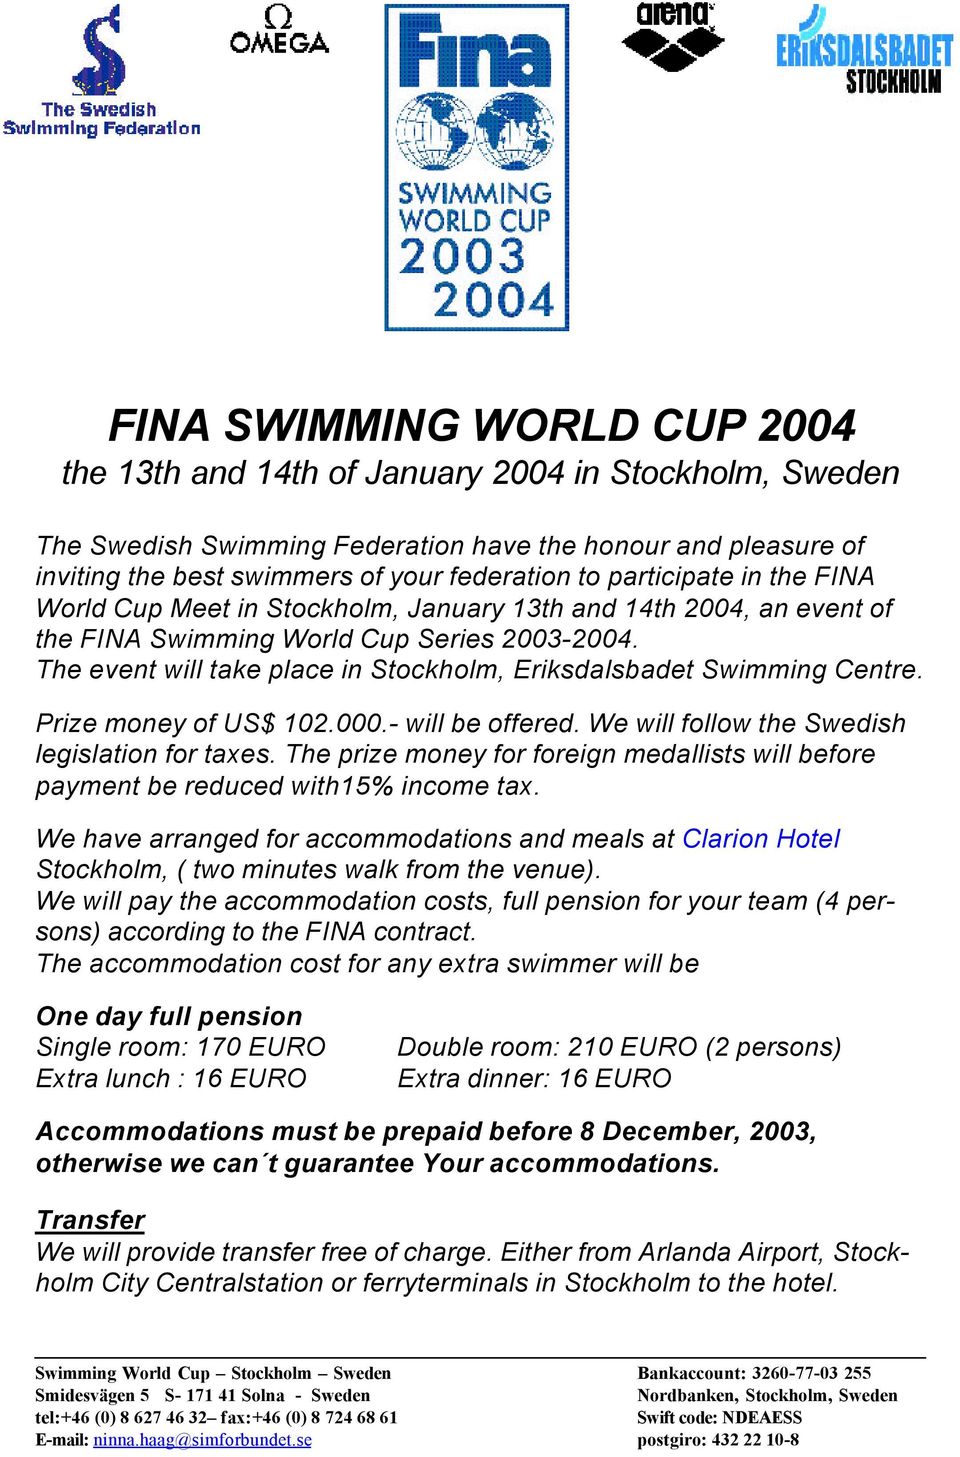 The event will take place in Stockholm, Eriksdalsbadet Swimming Centre. Prize money of US$ 102.000.- will be offered. We will follow the Swedish legislation for taxes.